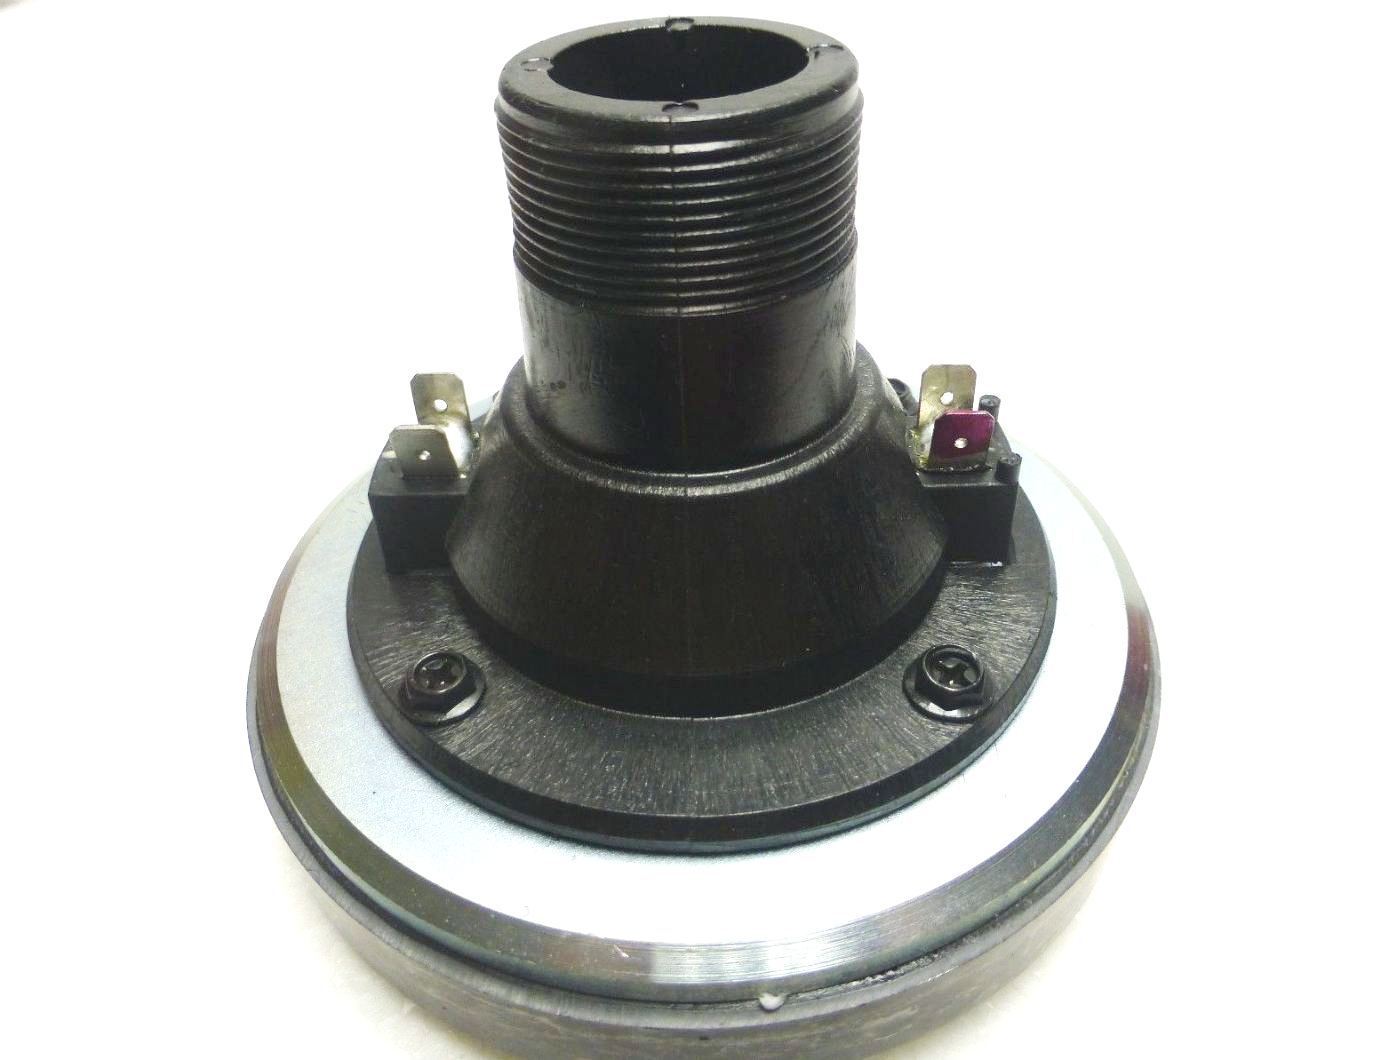 Replacement Driver For EV Electro Voice DH1202, DH2010, DH3, DH2001, DH2010A, 8Ω